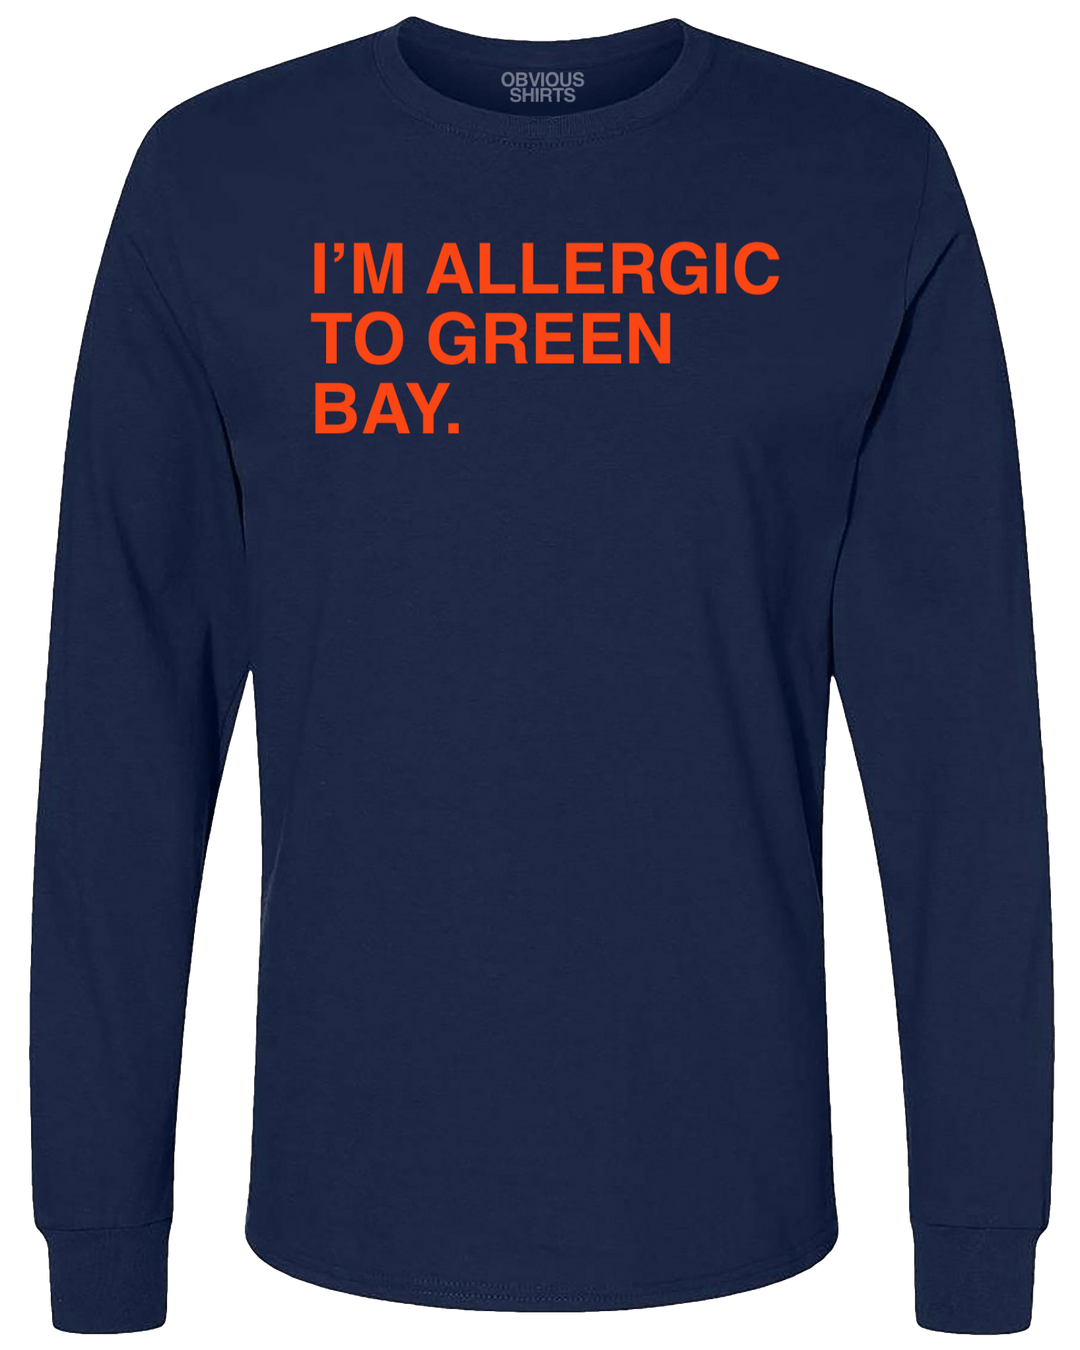 I'M ALLERGIC TO GREEN BAY. (LONG SLEEVE) - OBVIOUS SHIRTS